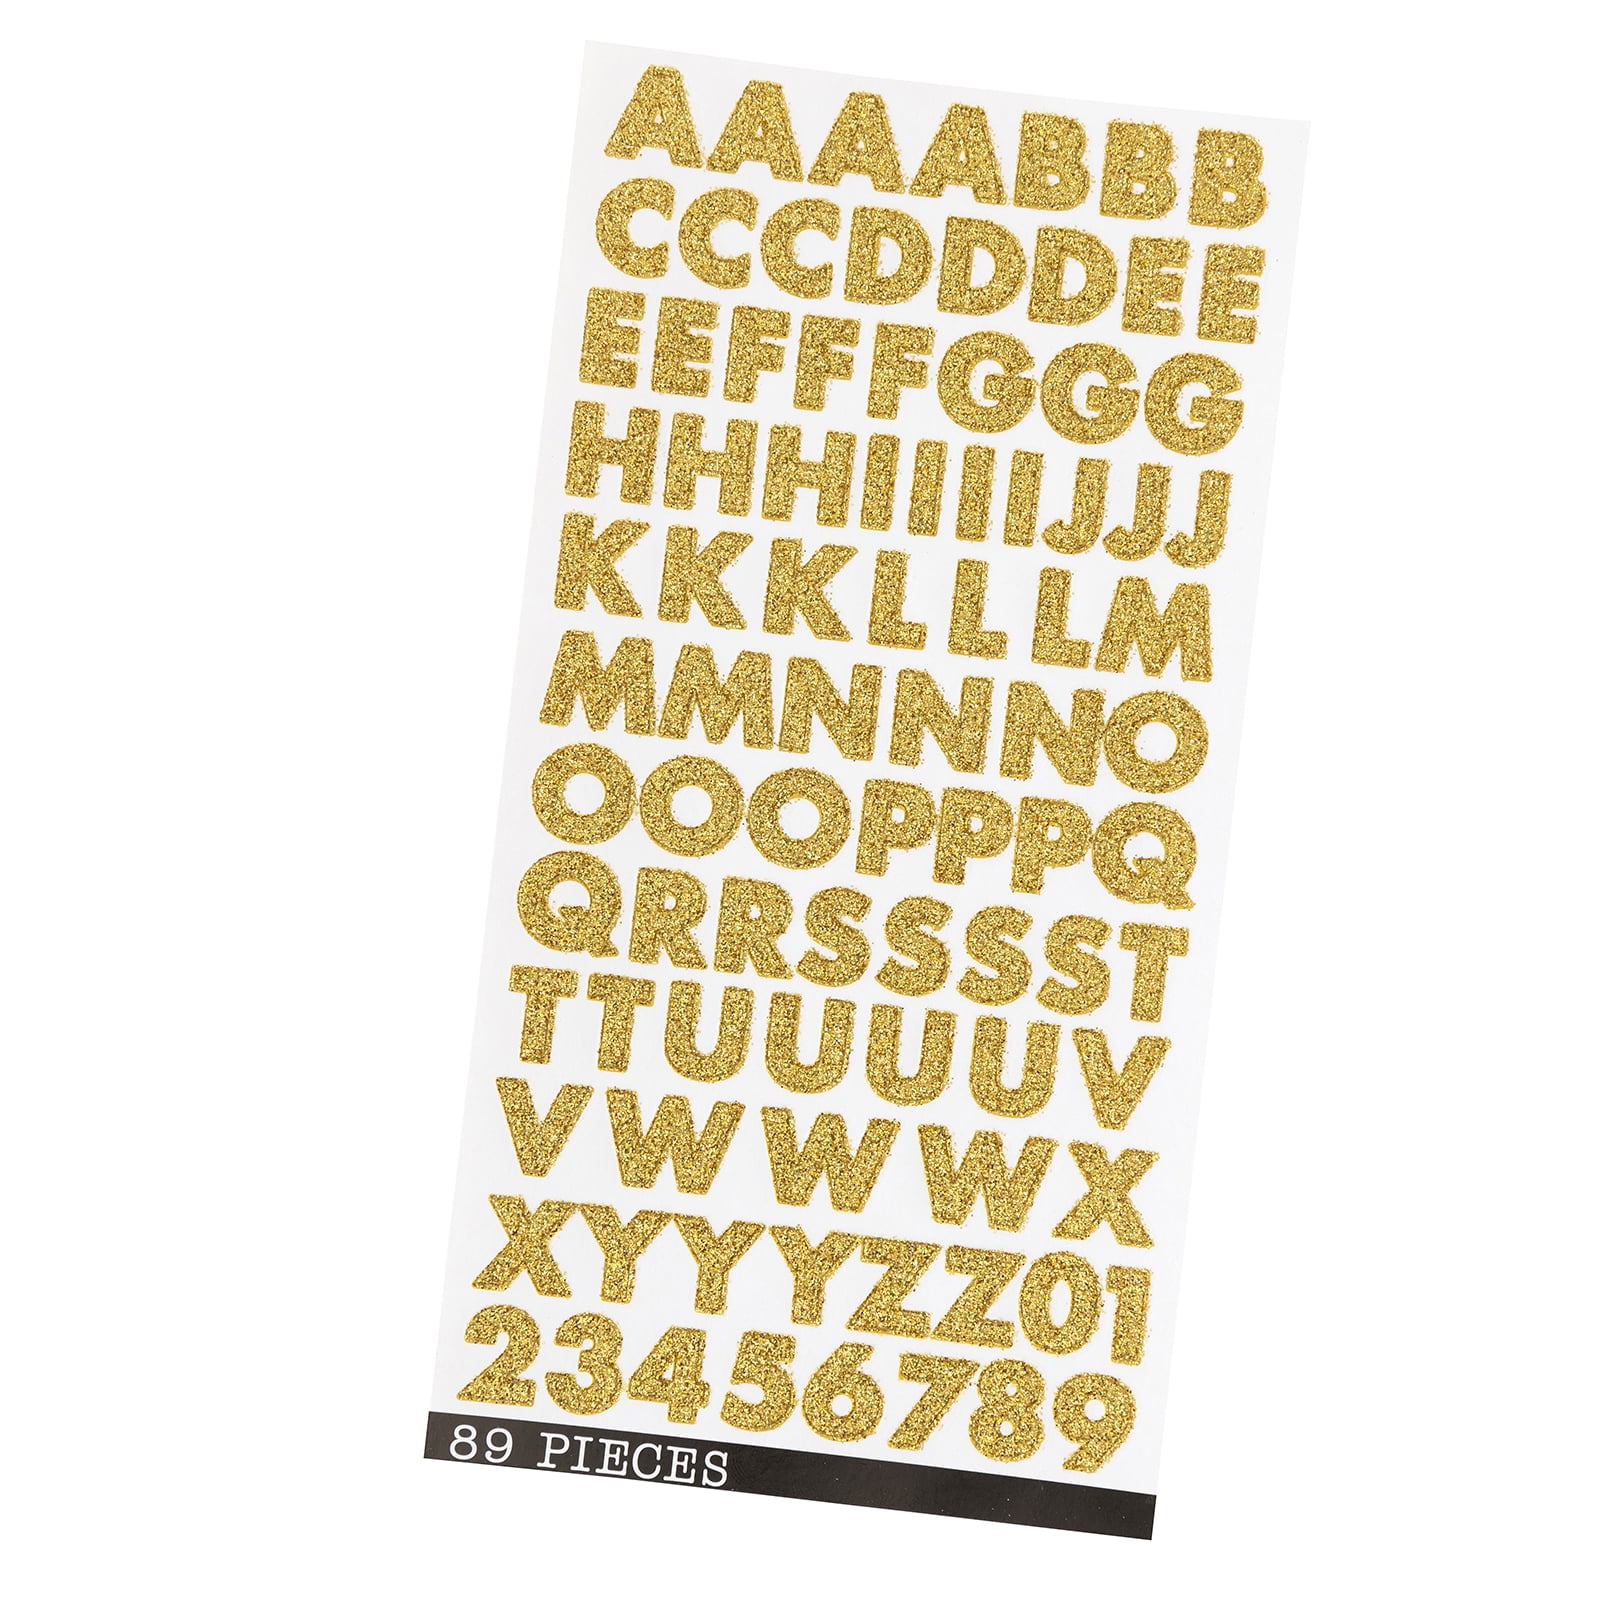 Sticko Alphabet Stickers-Sweetheart Swirl Gold Foil – American Crafts